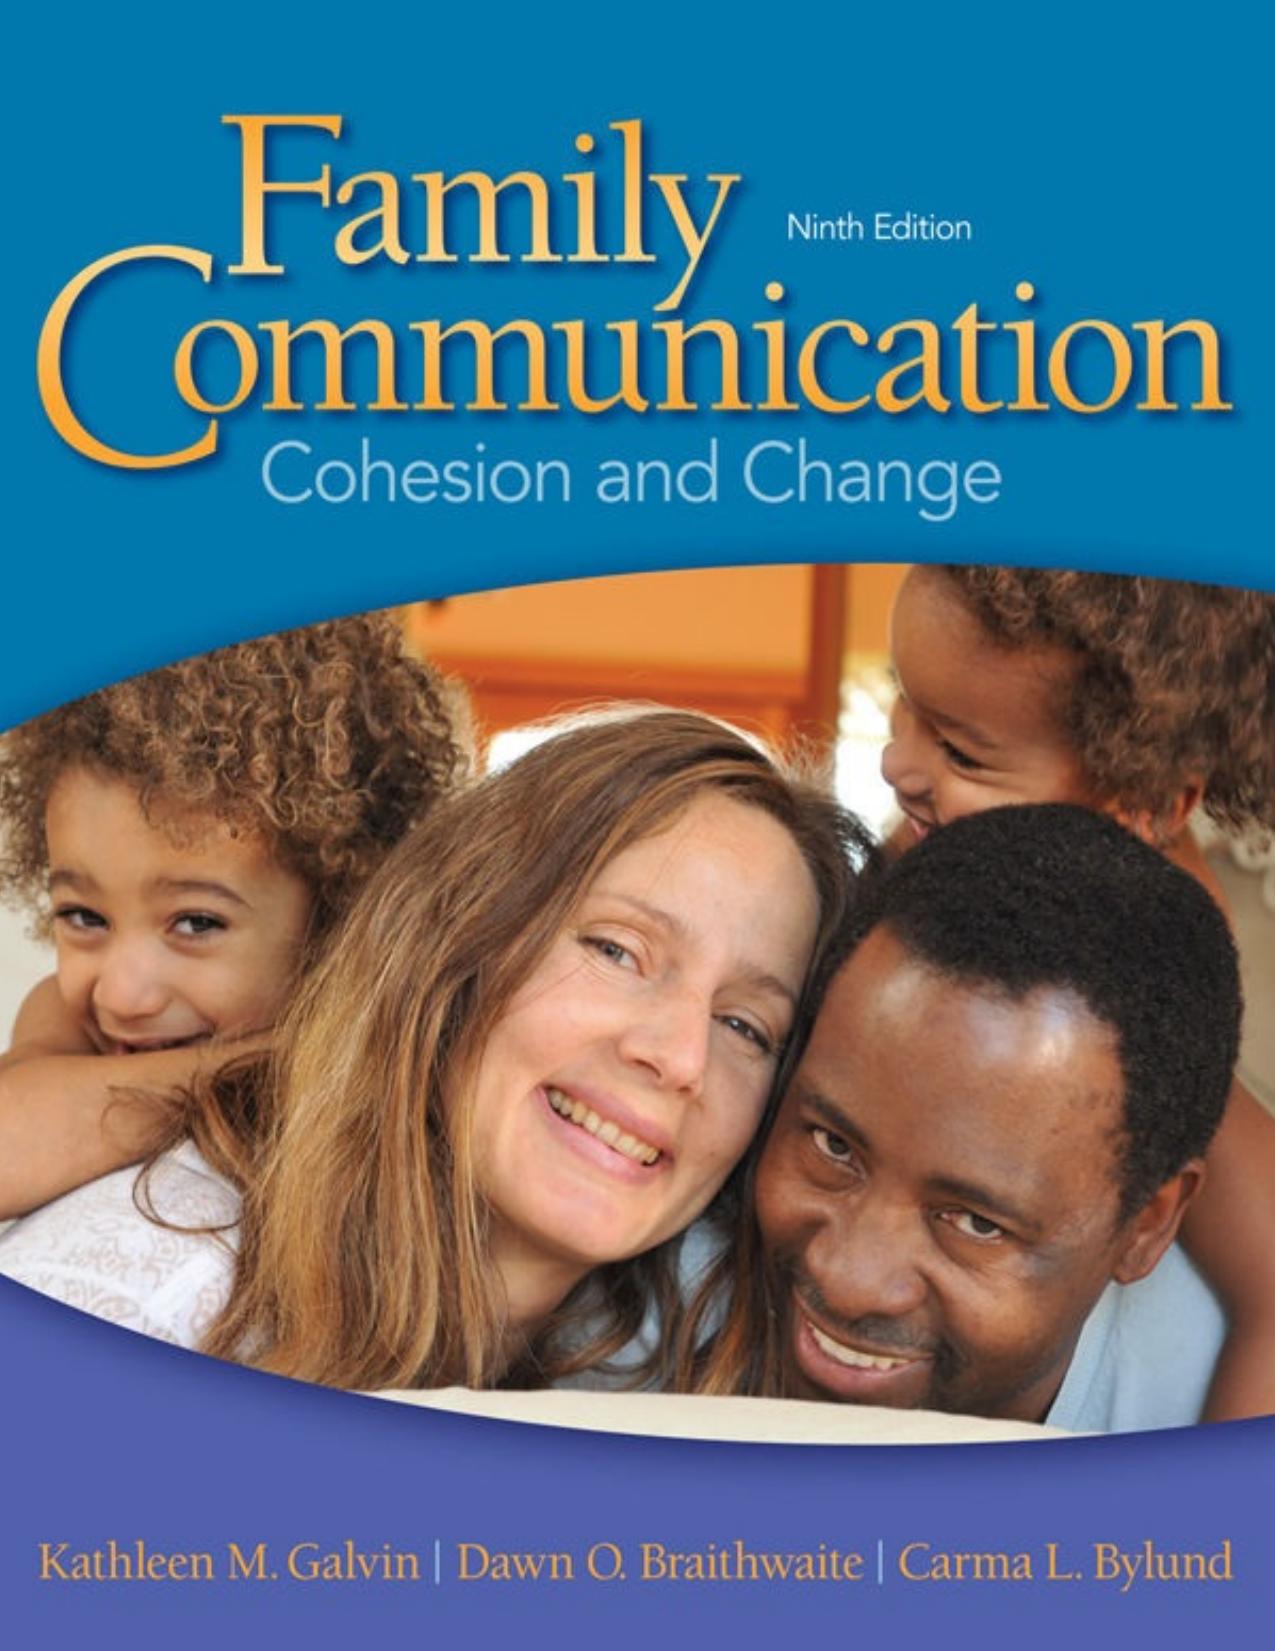 Family Communication: Cohesion and Change \(9th Edition\) - PDFDrive.com